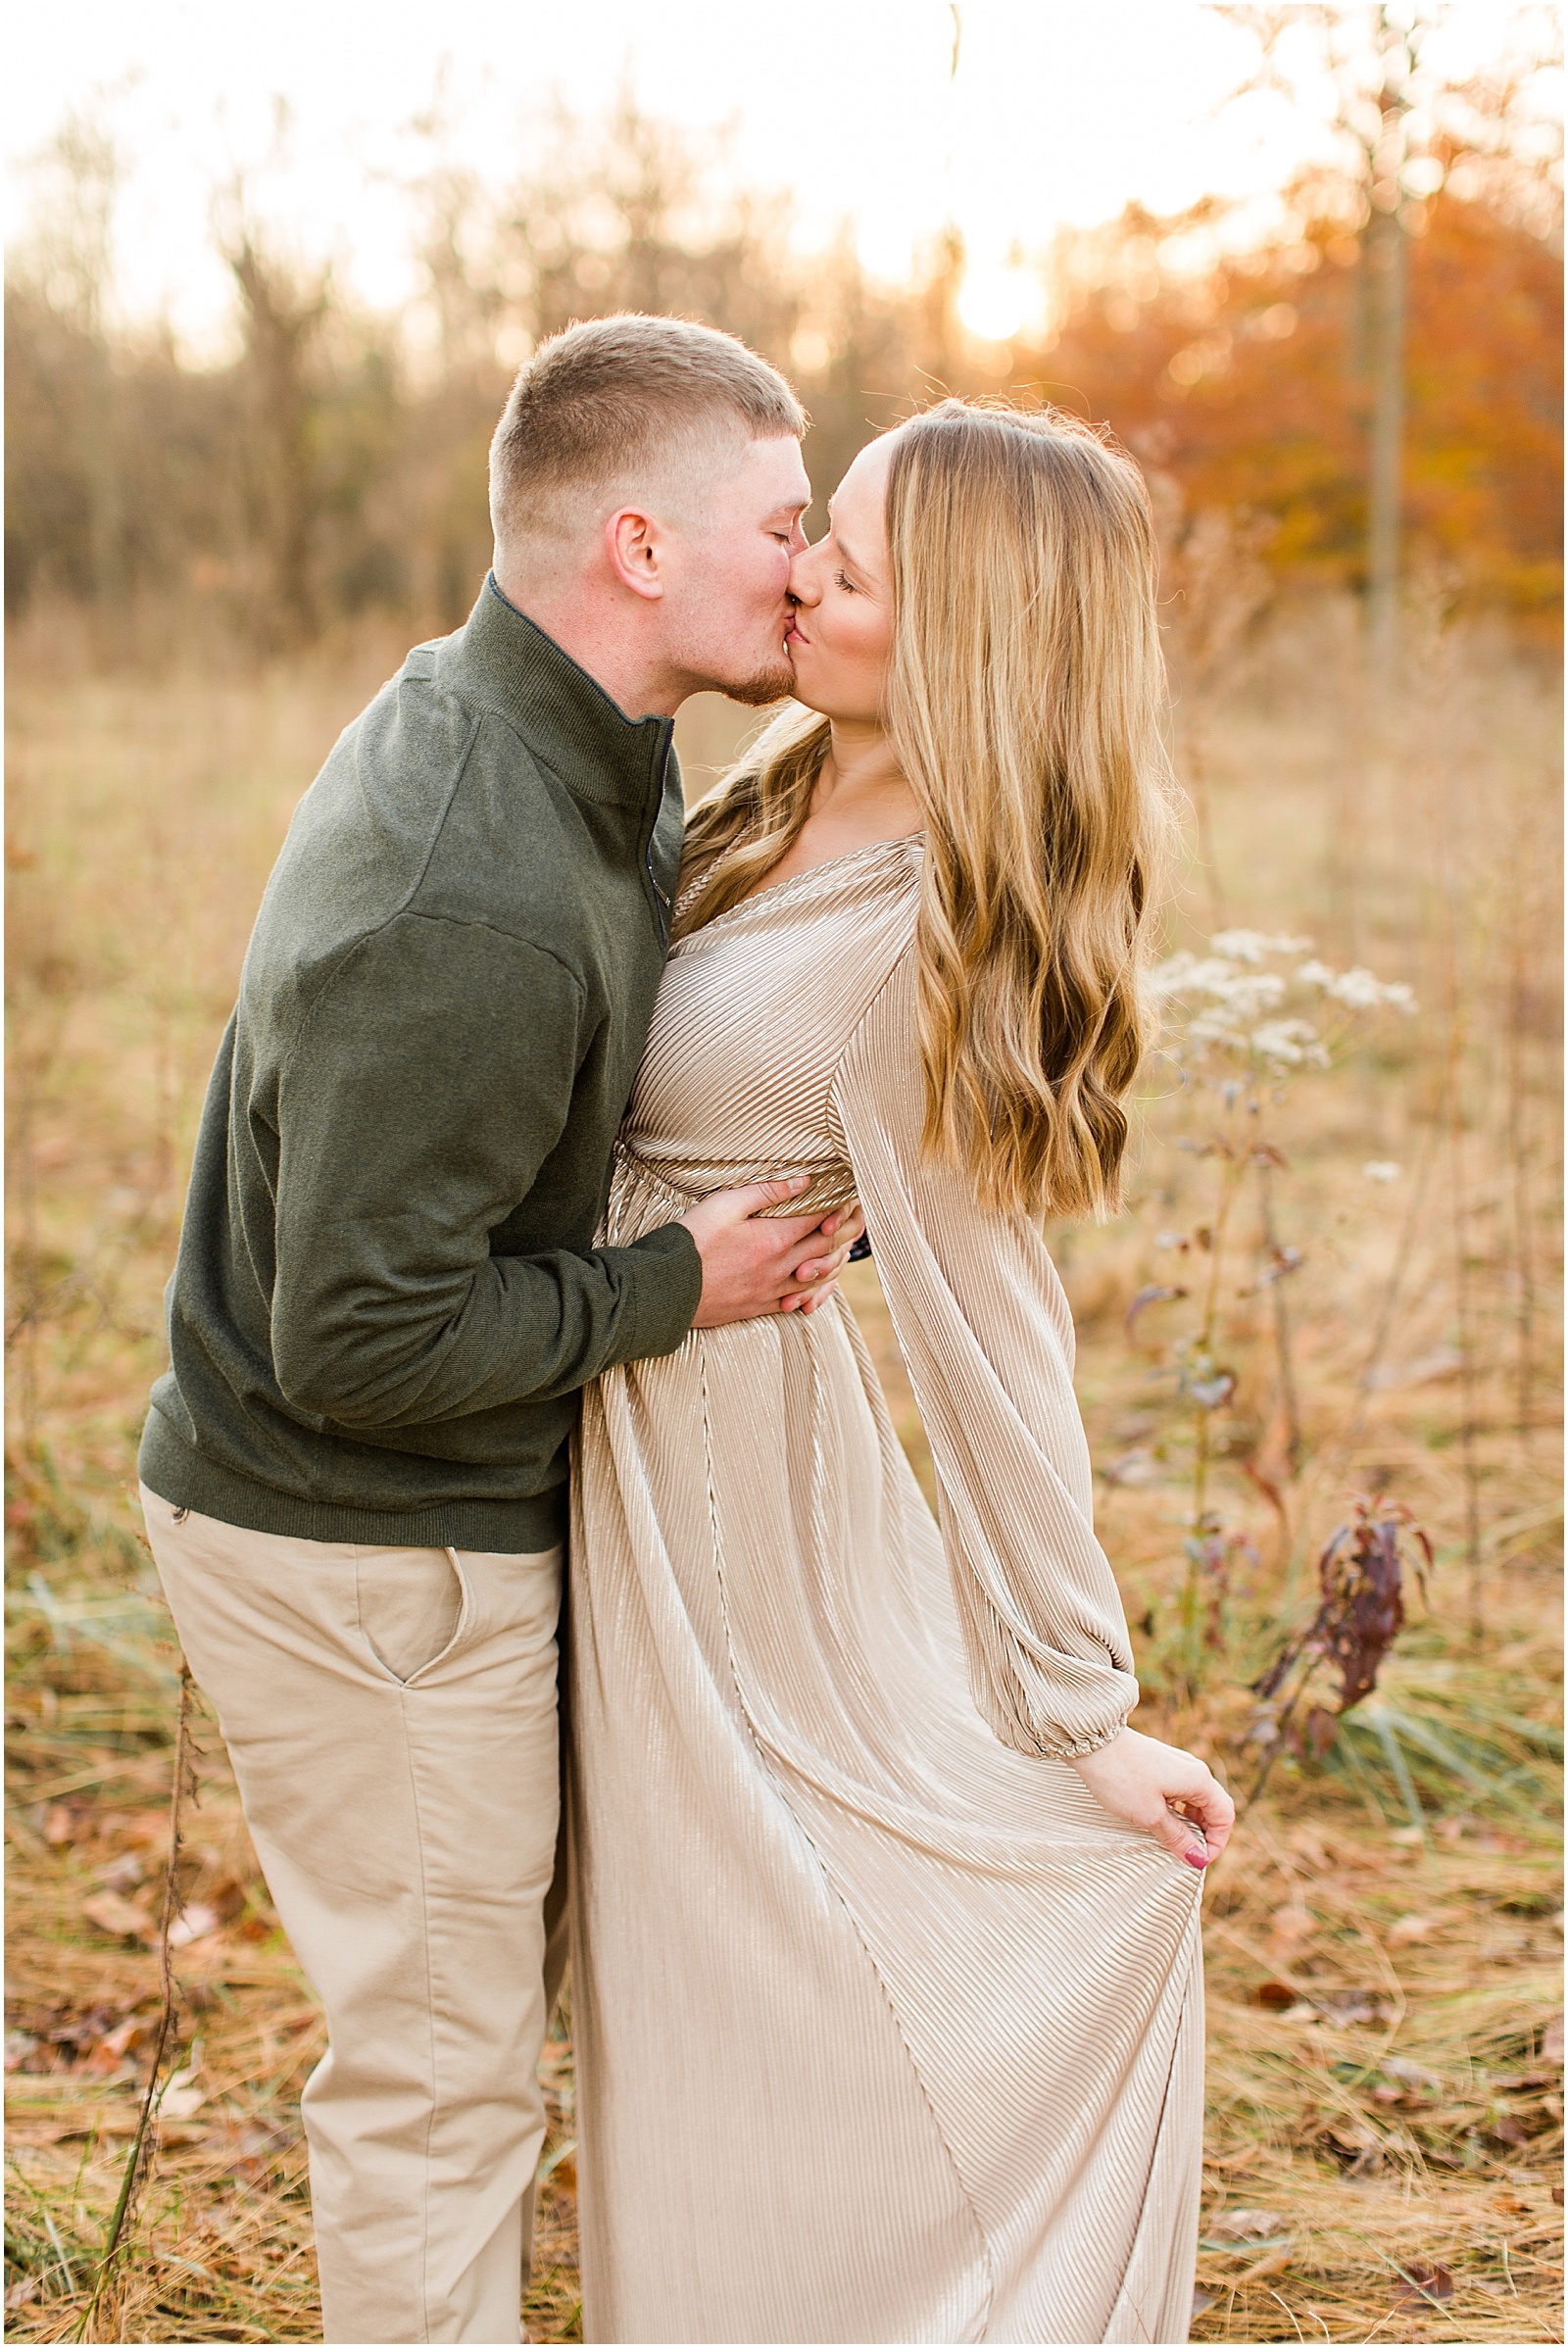 A Fall Southern Indiana Engagement Seesion | Cody and Hannah | Bret and Brandie Photography 044.jpg